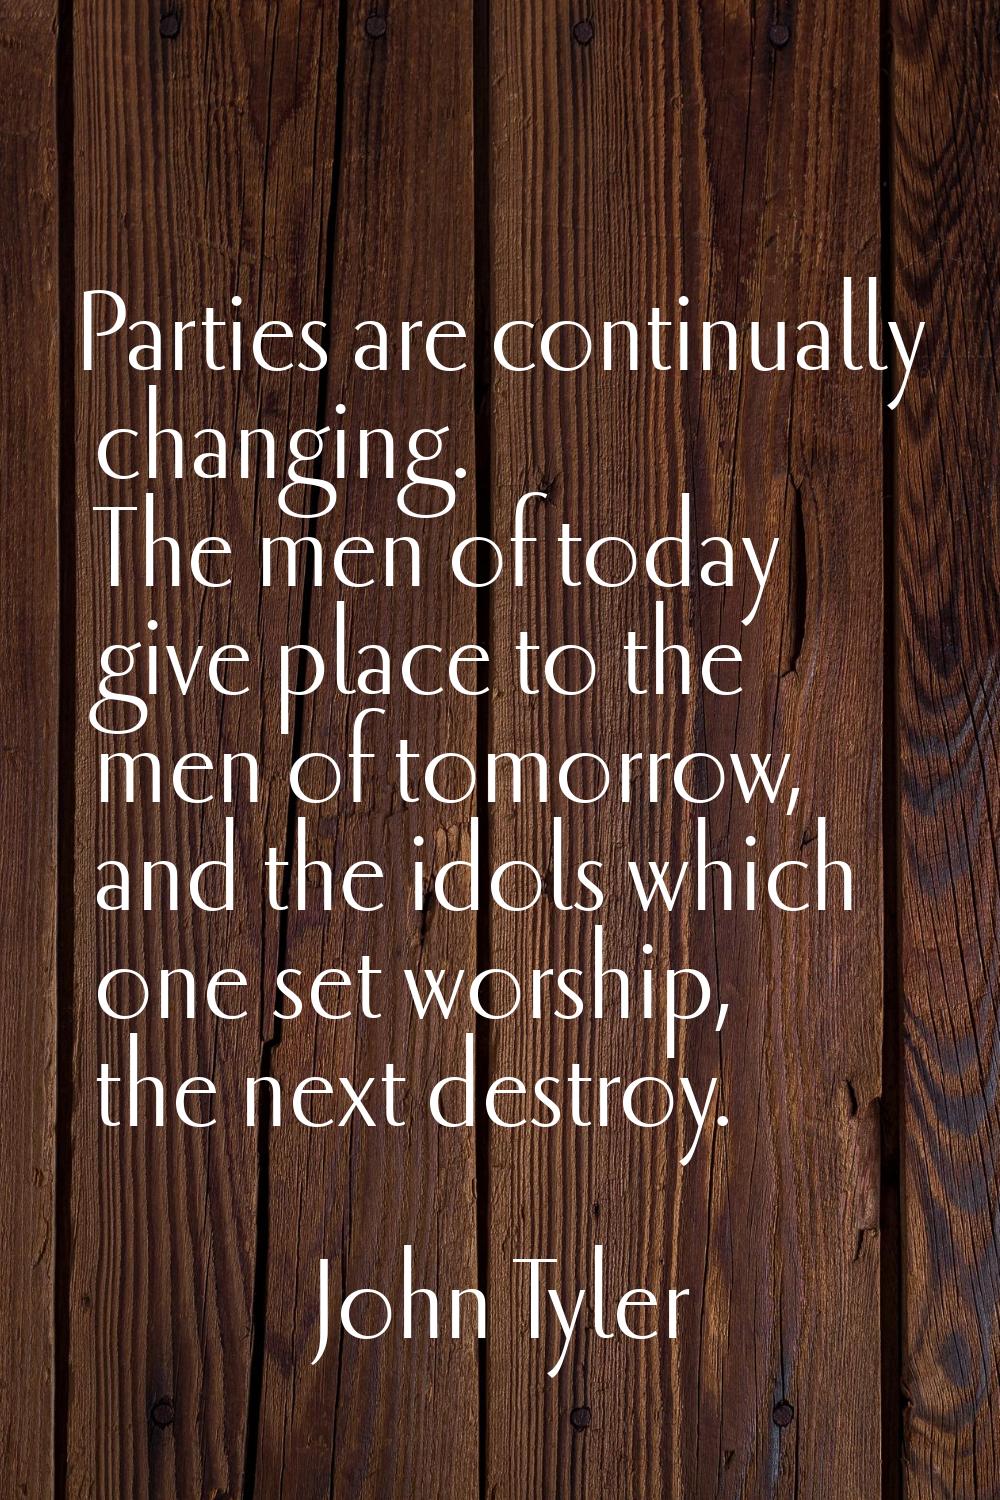 Parties are continually changing. The men of today give place to the men of tomorrow, and the idols